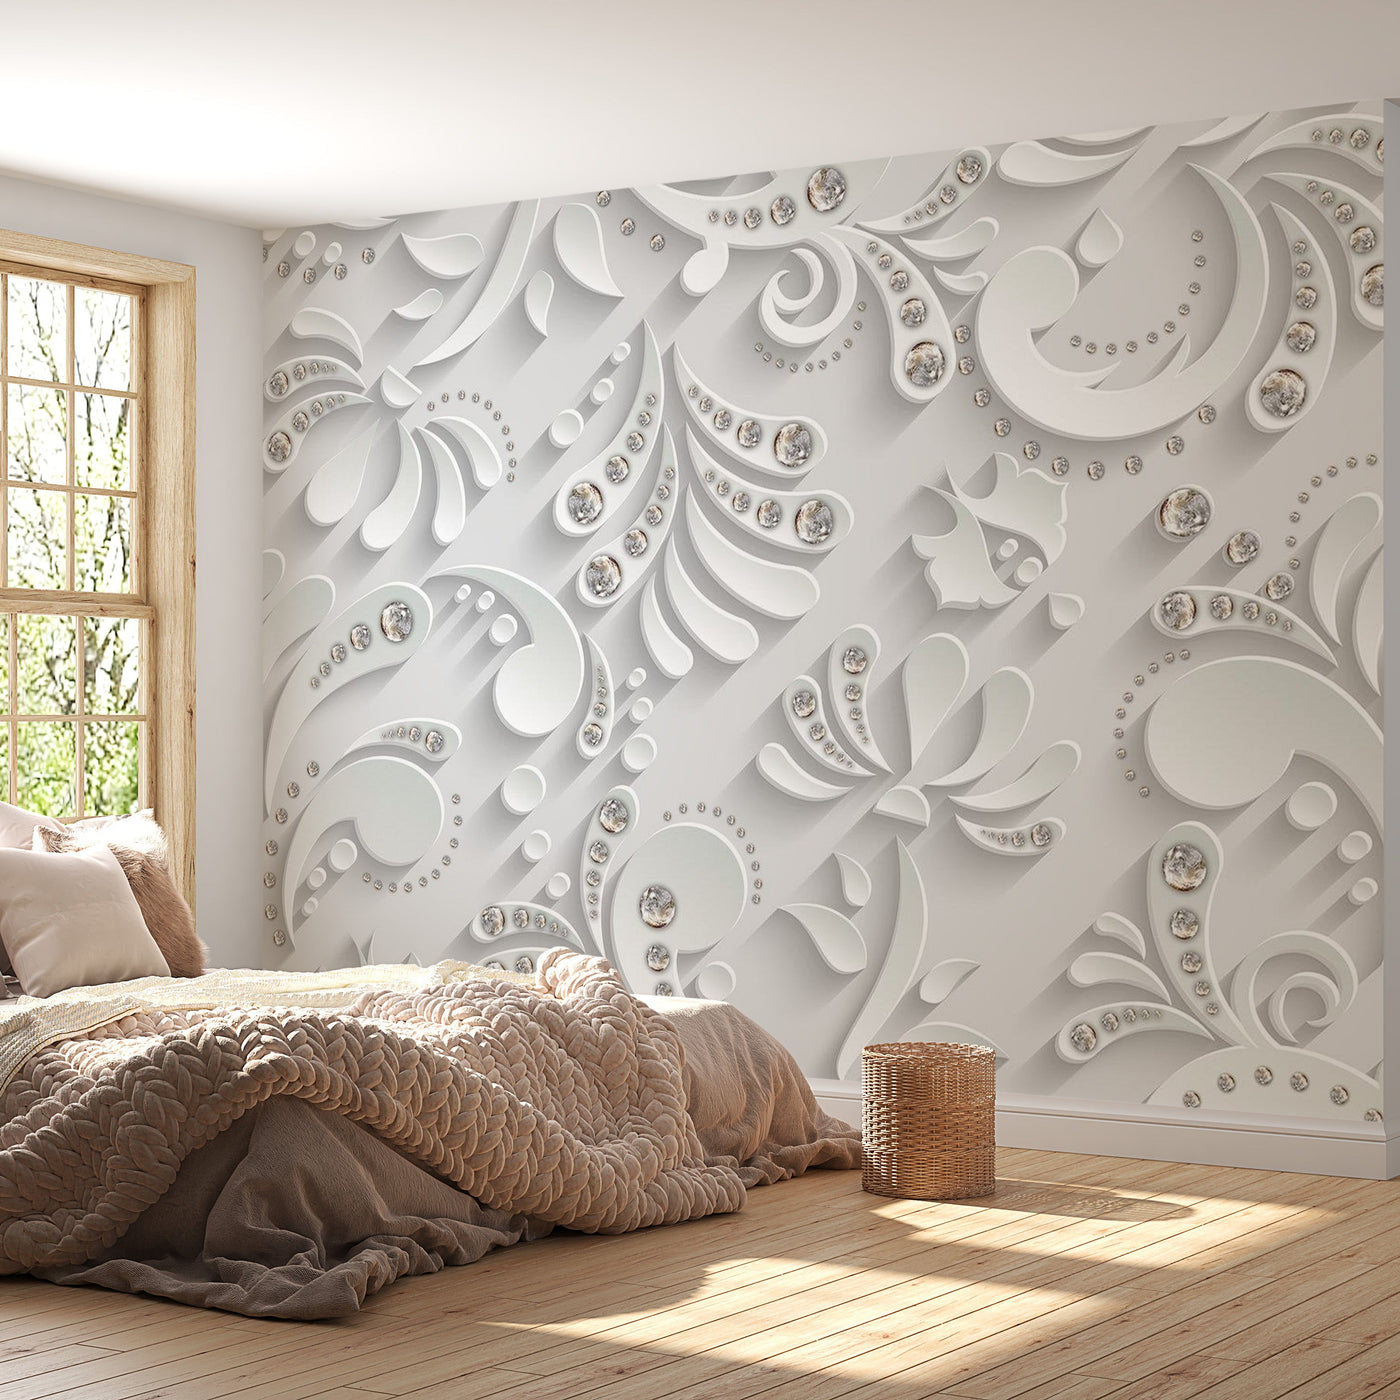 Most Popular Self-Adhesive and Removable Wall Decals